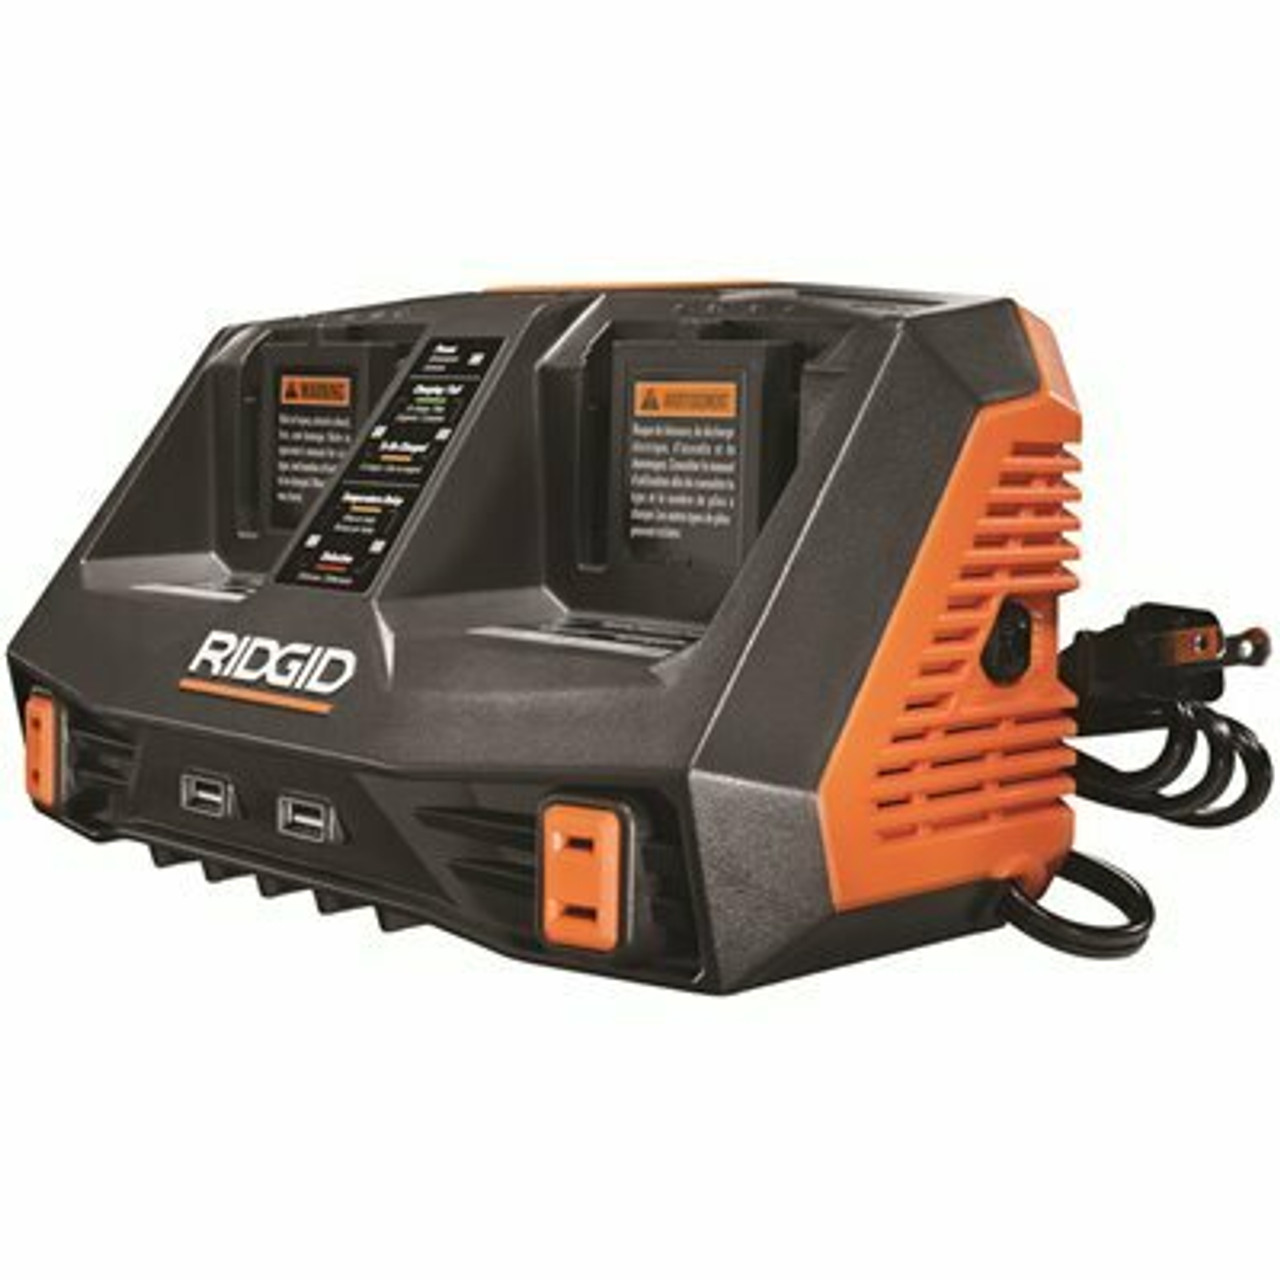 Ridgid 18V Dual Port Dual Chemistry Sequential Charger With Dual Usb Ports